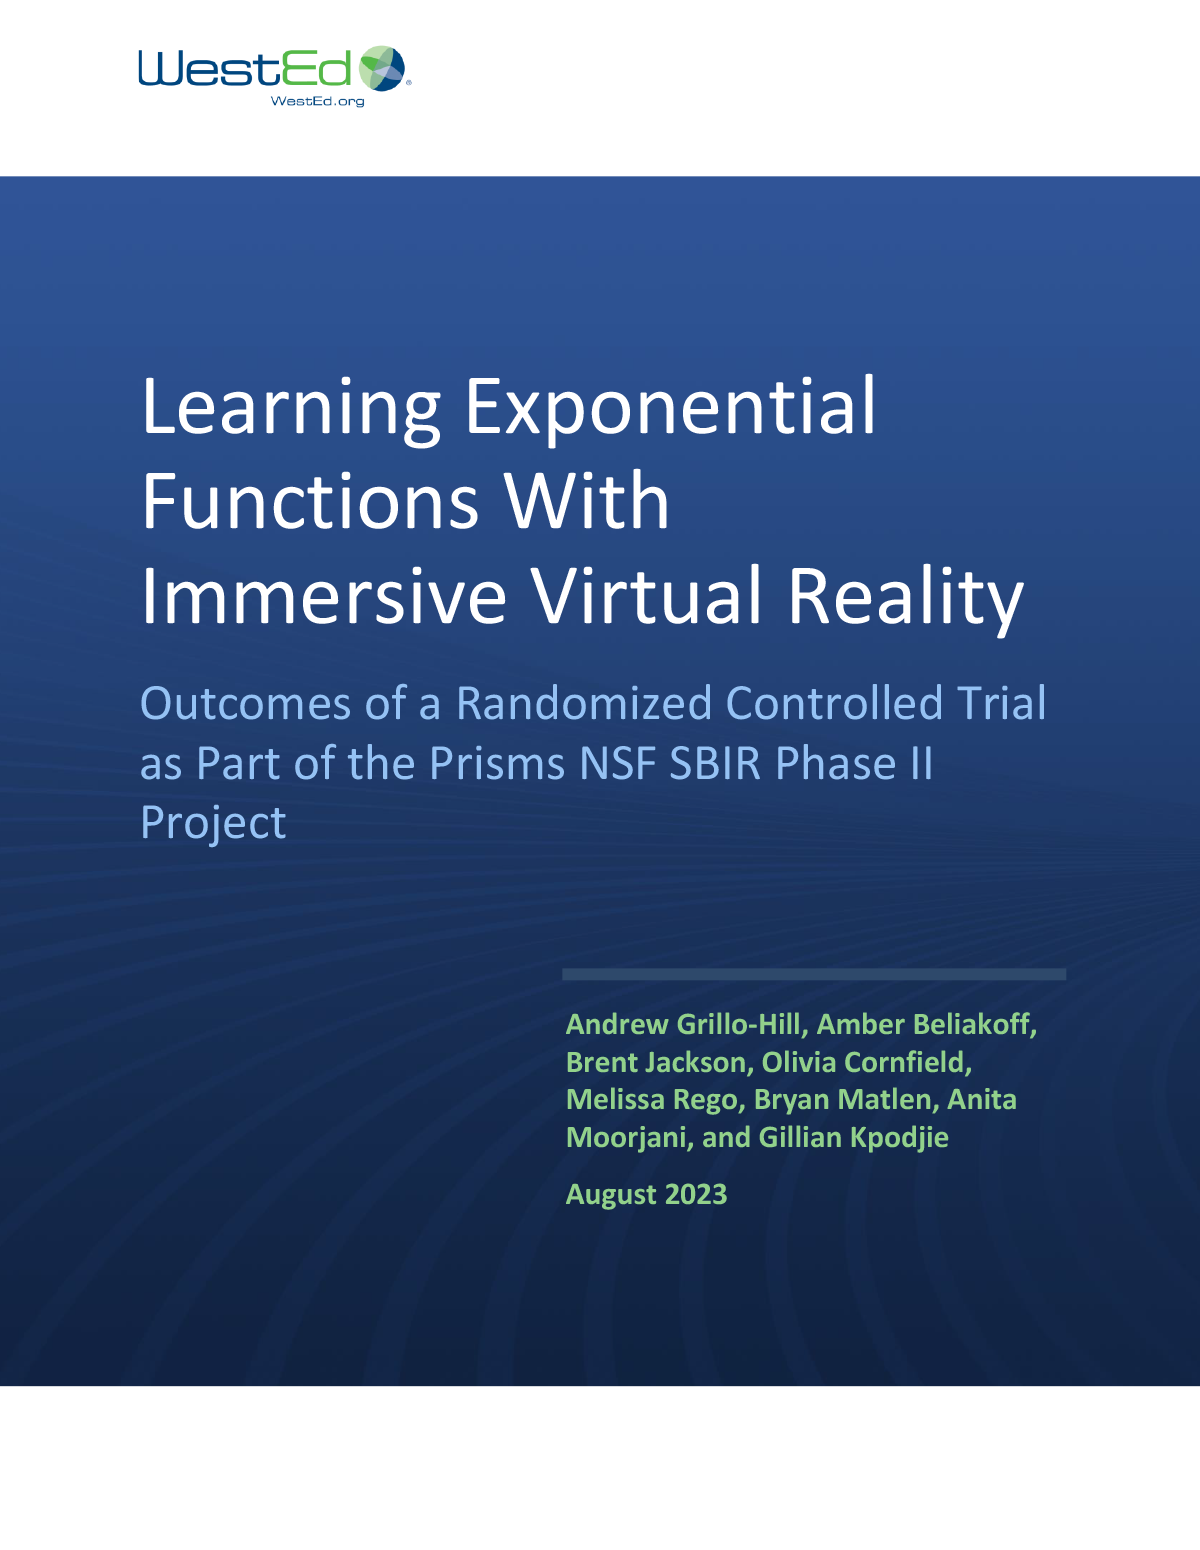 Learning Exponential Functions With Immersive Virtual Reality Outcomes of a Randomized Controlled Trial as Part of the Prisms NSF SBIR Phase II Project